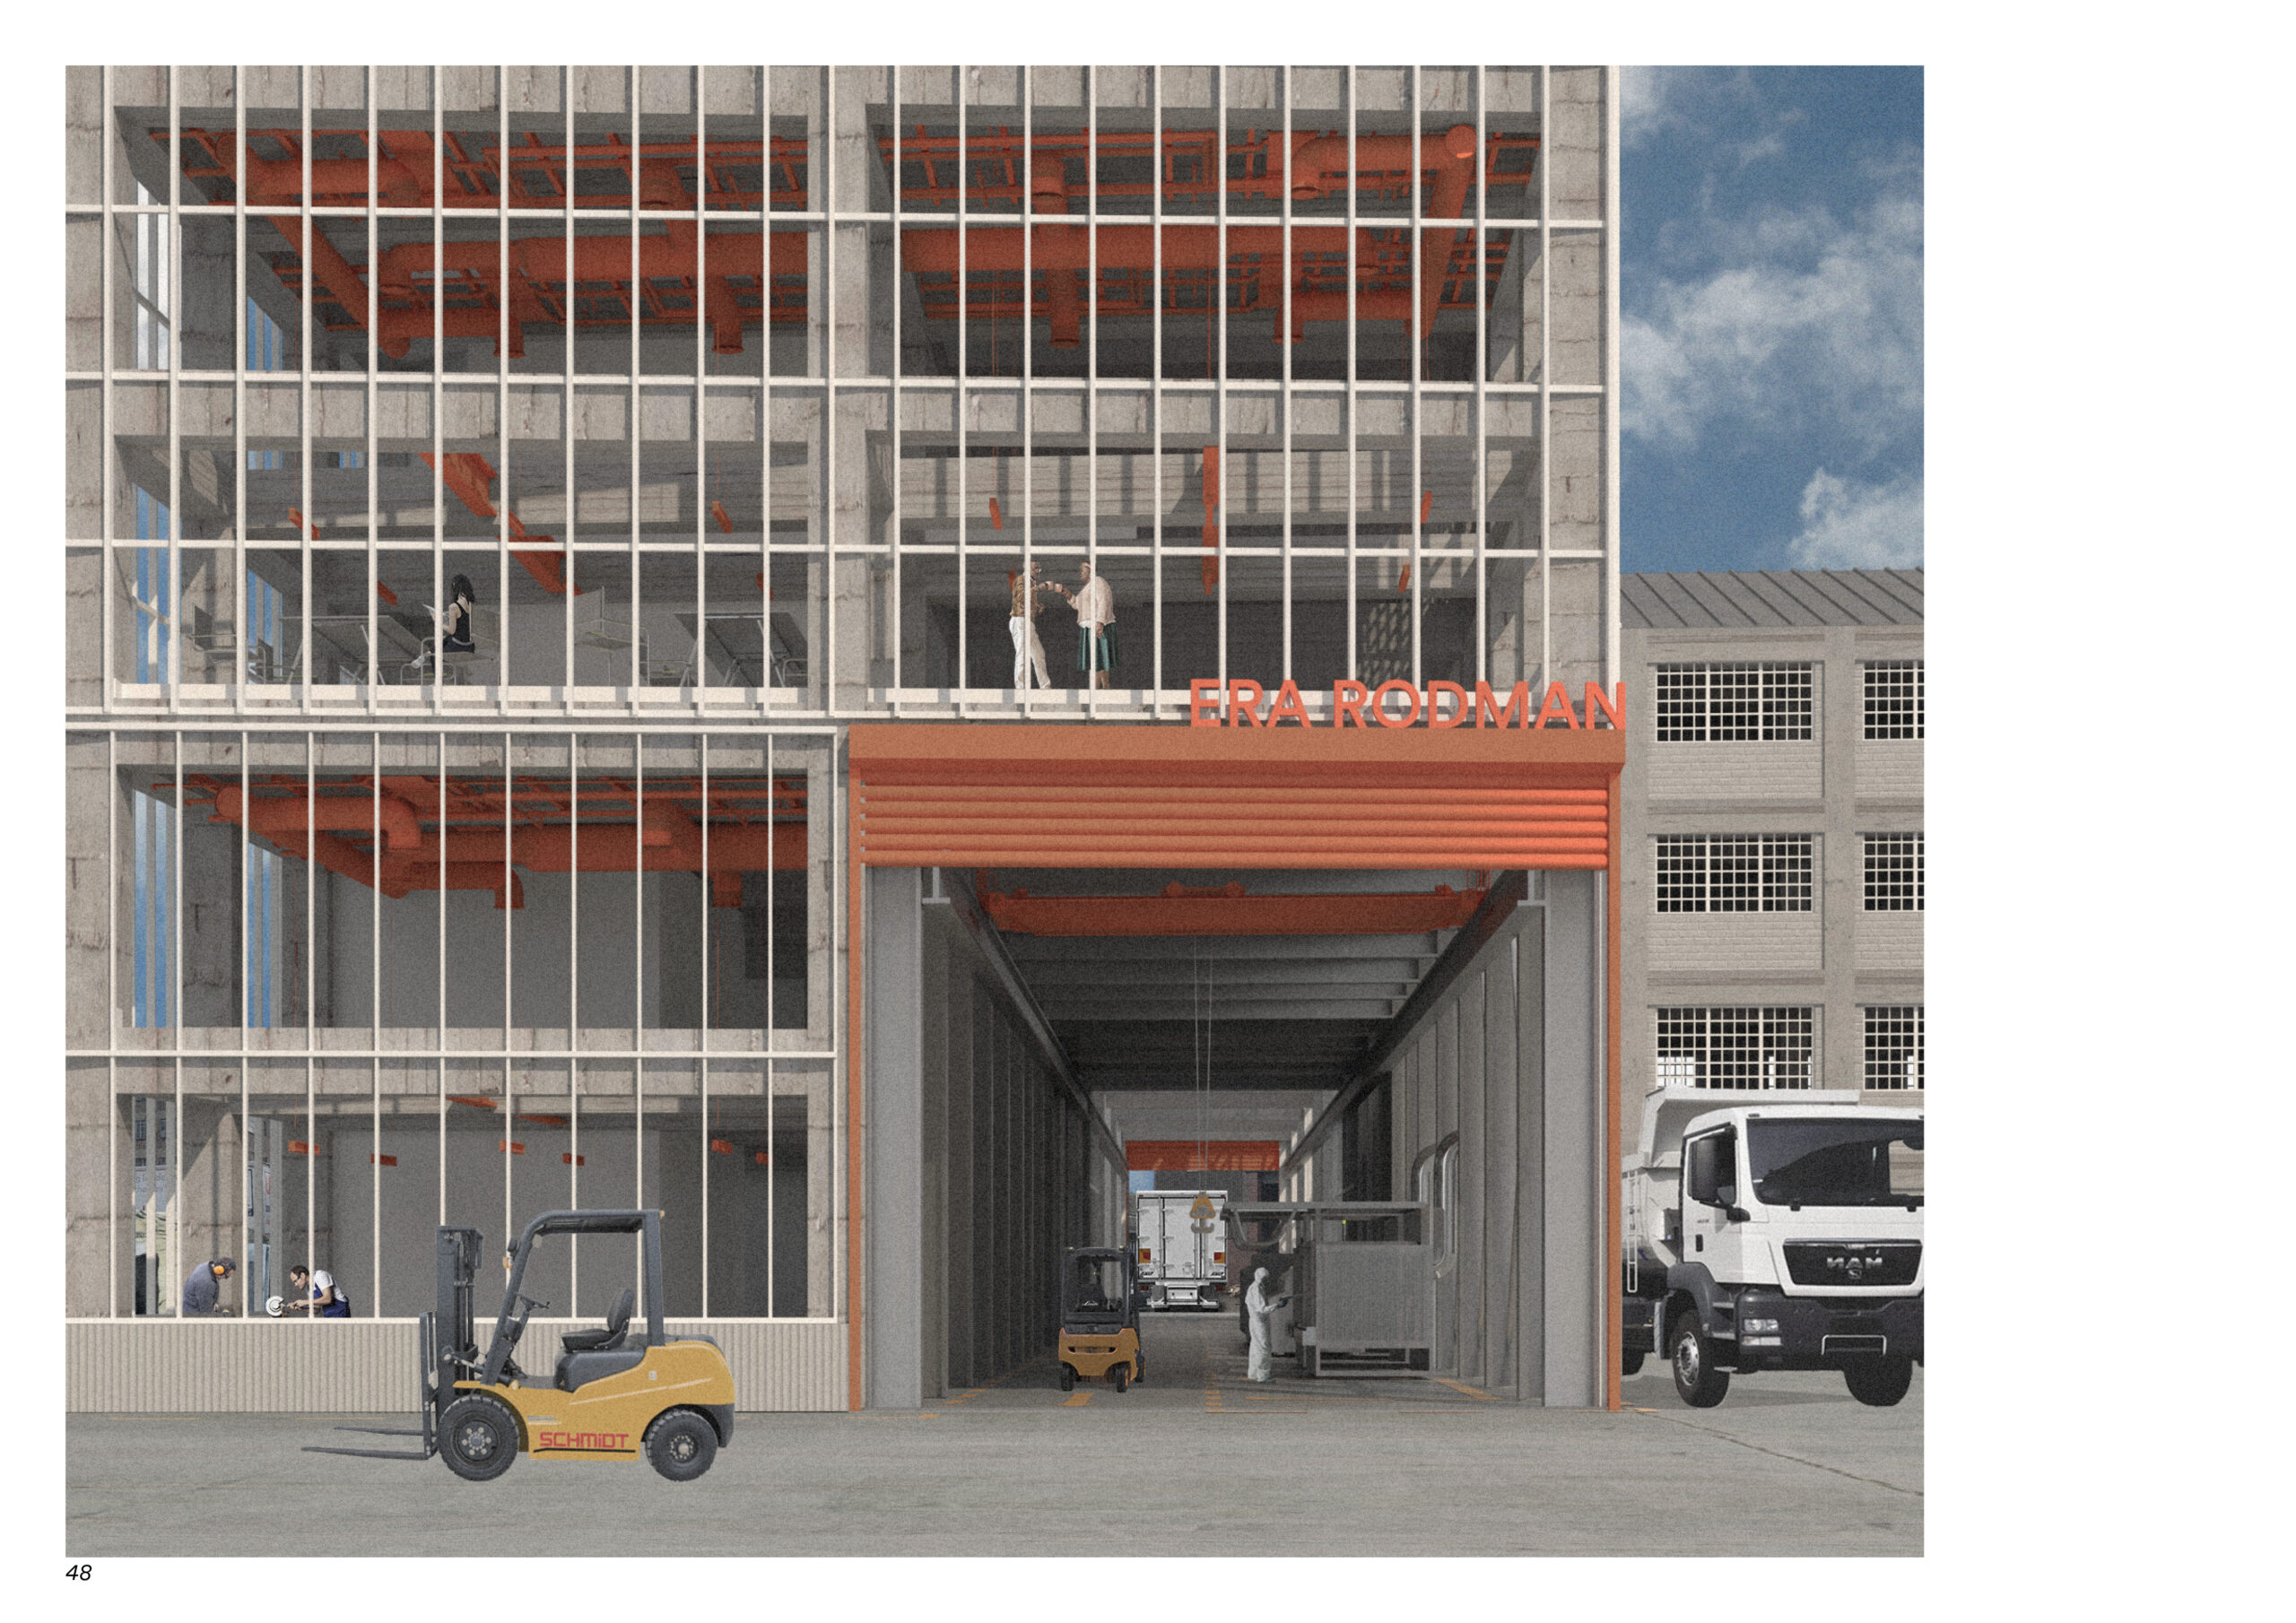 a render of the entrance of the metal works which is orange. behind is made of glass so we can see into the space